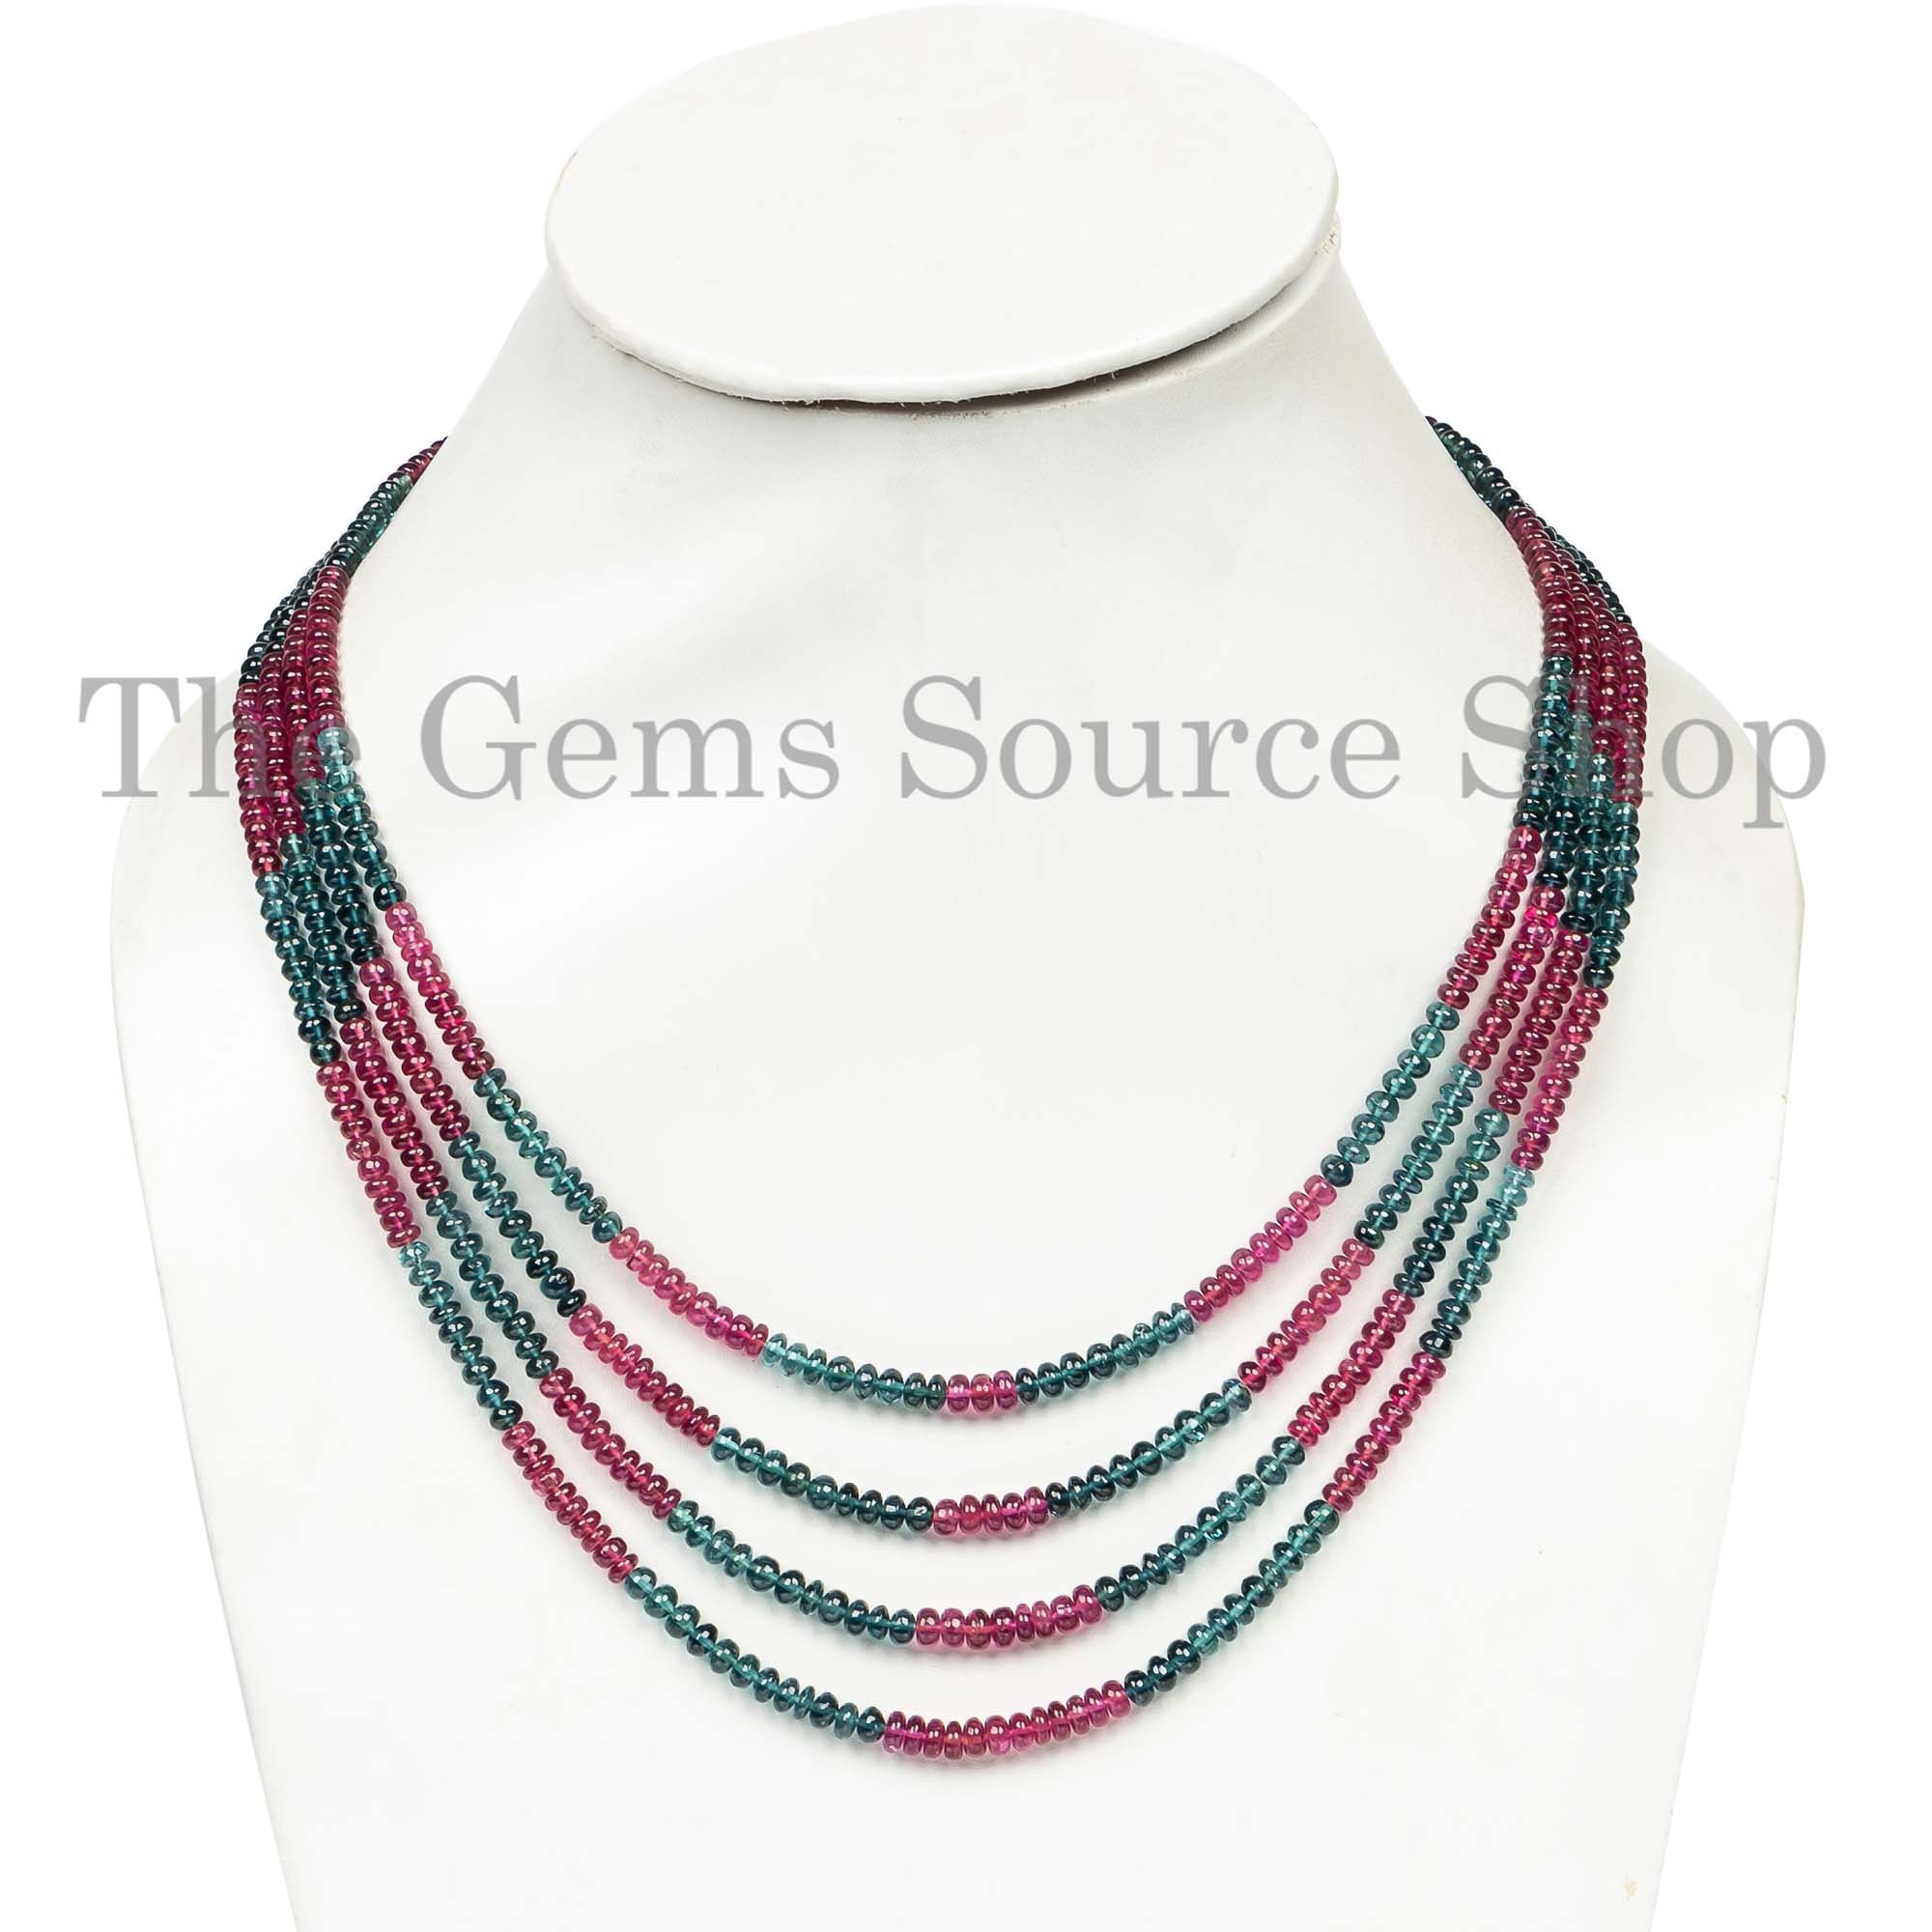 3.5-5mm Rubellite Pink Indicolite Blue Tourmaline Necklace, Gemstone Necklace, Natural Tourmaline, Smooth Rondelle Necklace, Beaded Necklace